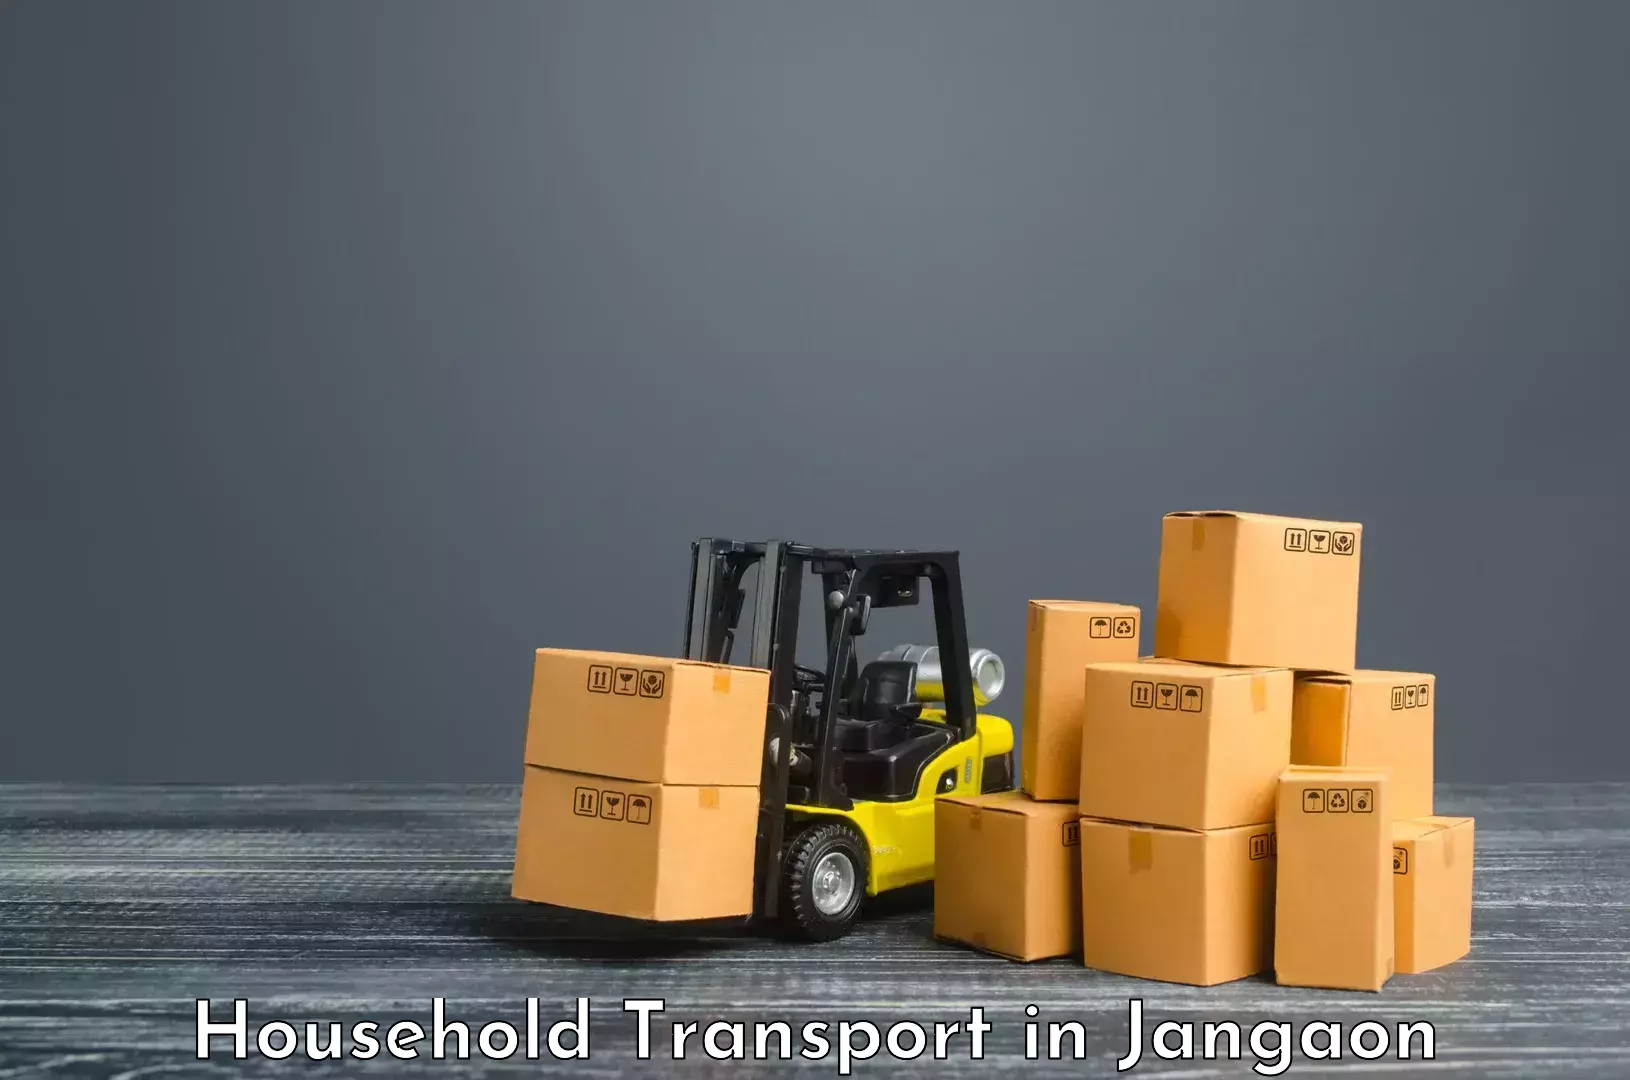 Household goods transport service in Jangaon